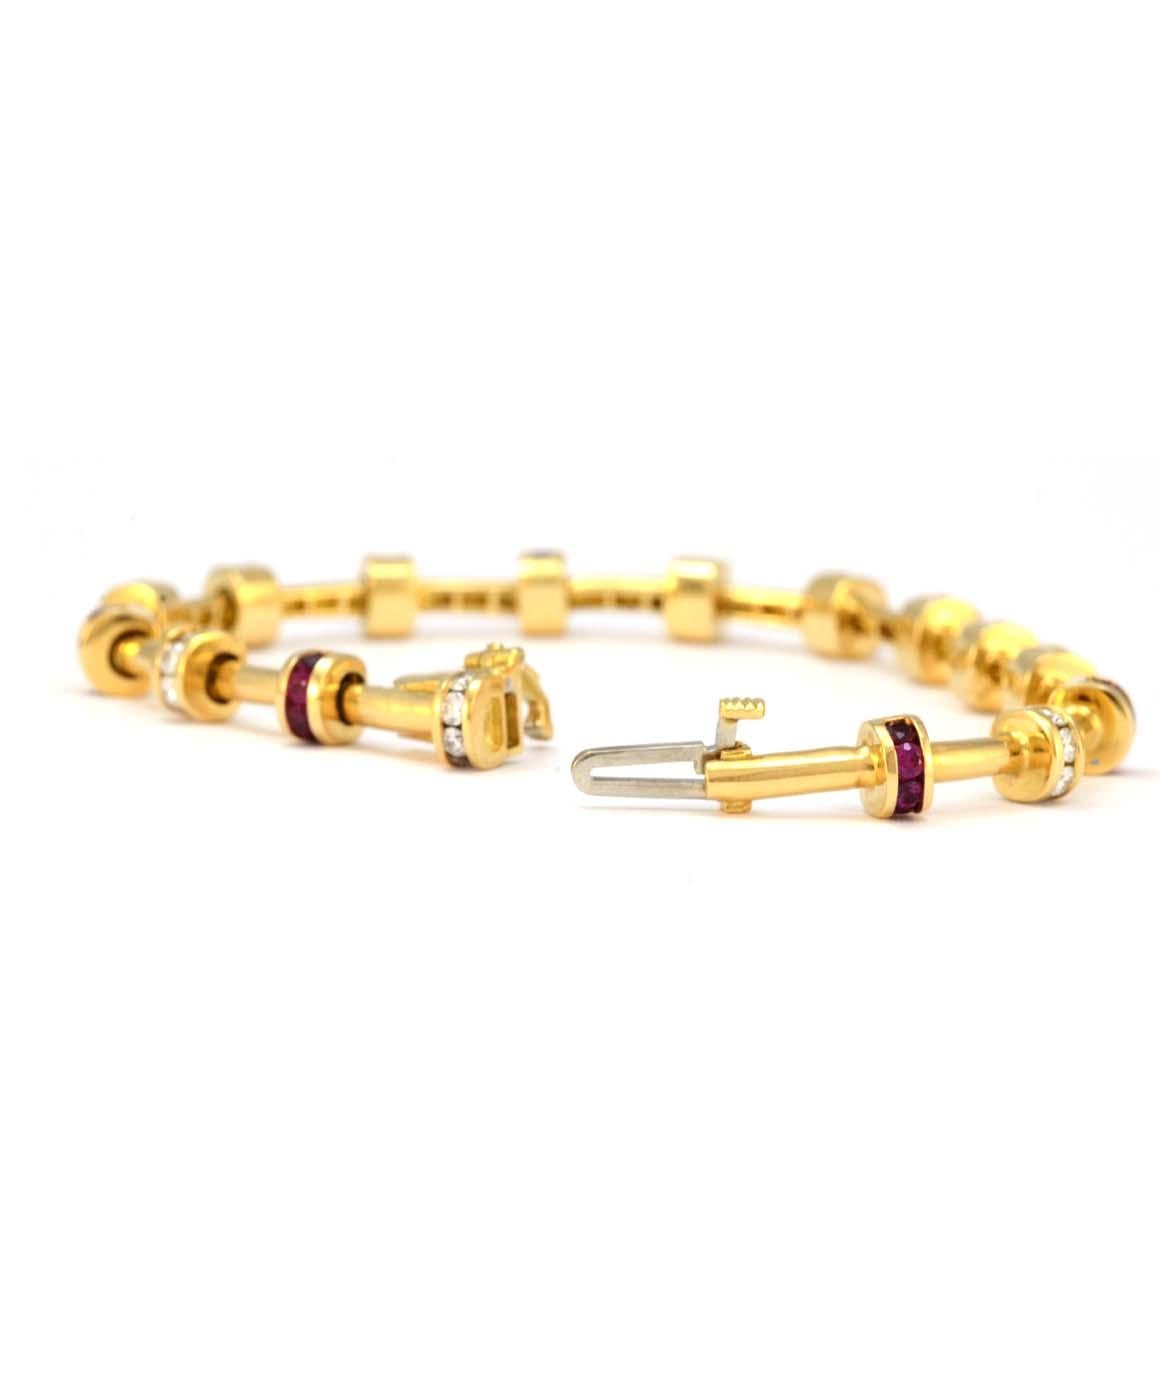 Take a look at this gorgeous 100% Authentic Charles Krypell Solid 18K yellow gold ruby & diamond bracelet in excellent condition! This bracelet is approximately 7.5 inches There are 8 links containing 4 diamonds each, 32 diamonds total. These